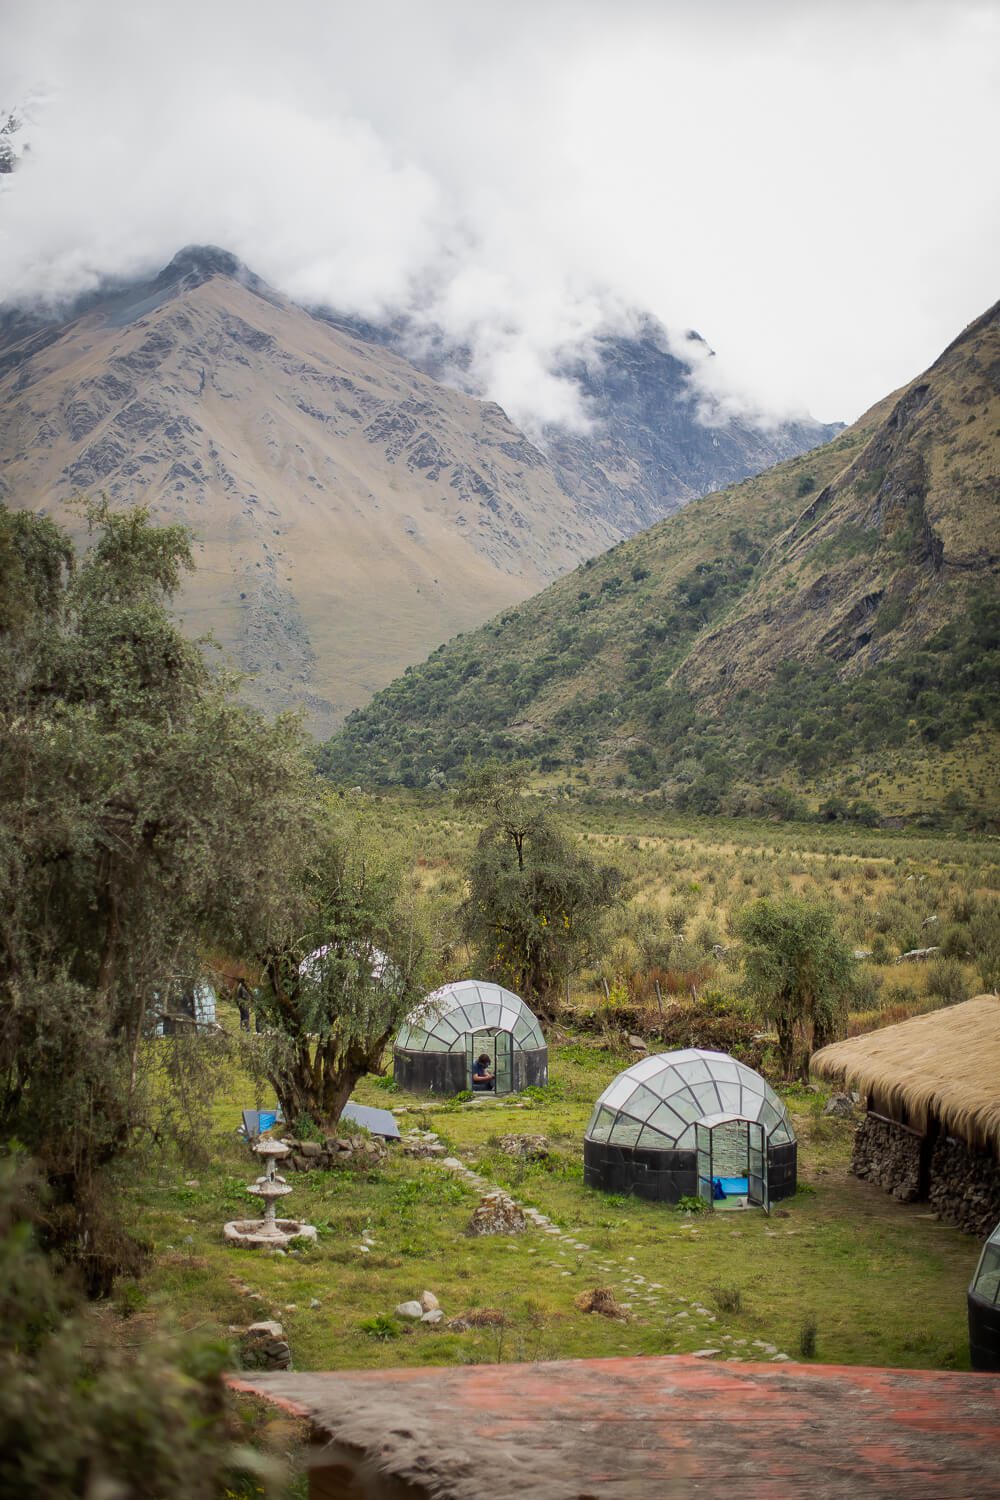 A place to stay on the Salkantay Trek